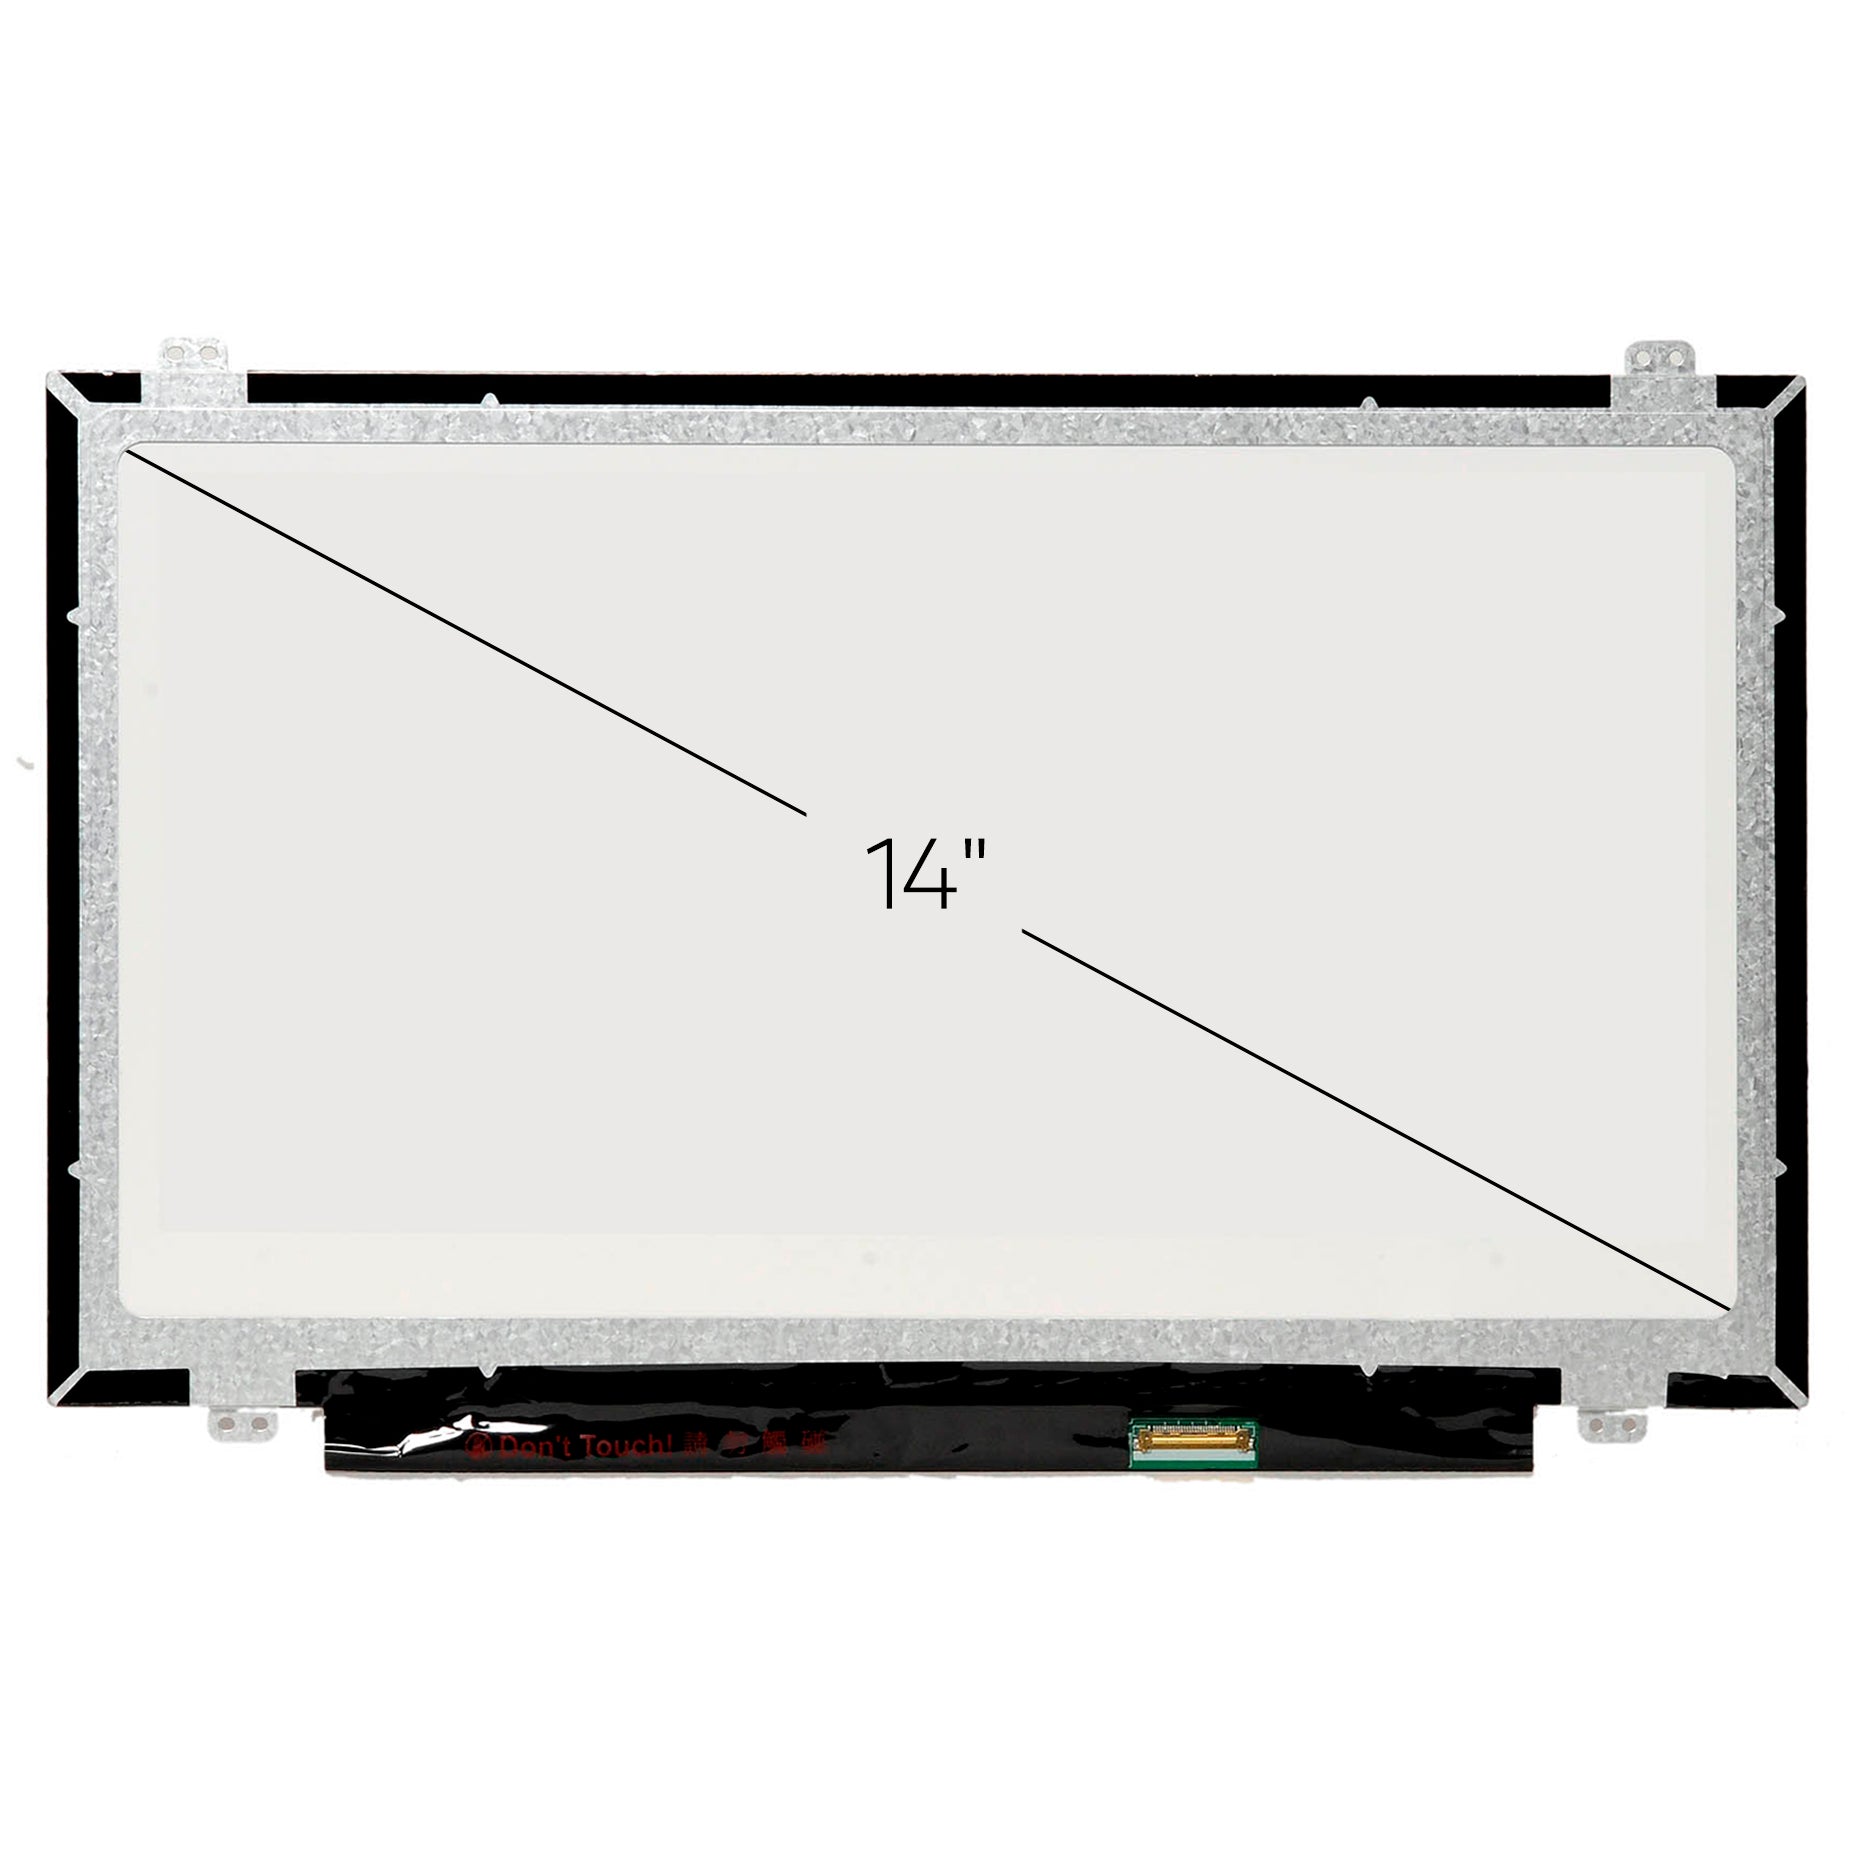 Screen Replacement for LP140WHU(TP)(N1) HD 1366x768 Glossy LCD LED Display